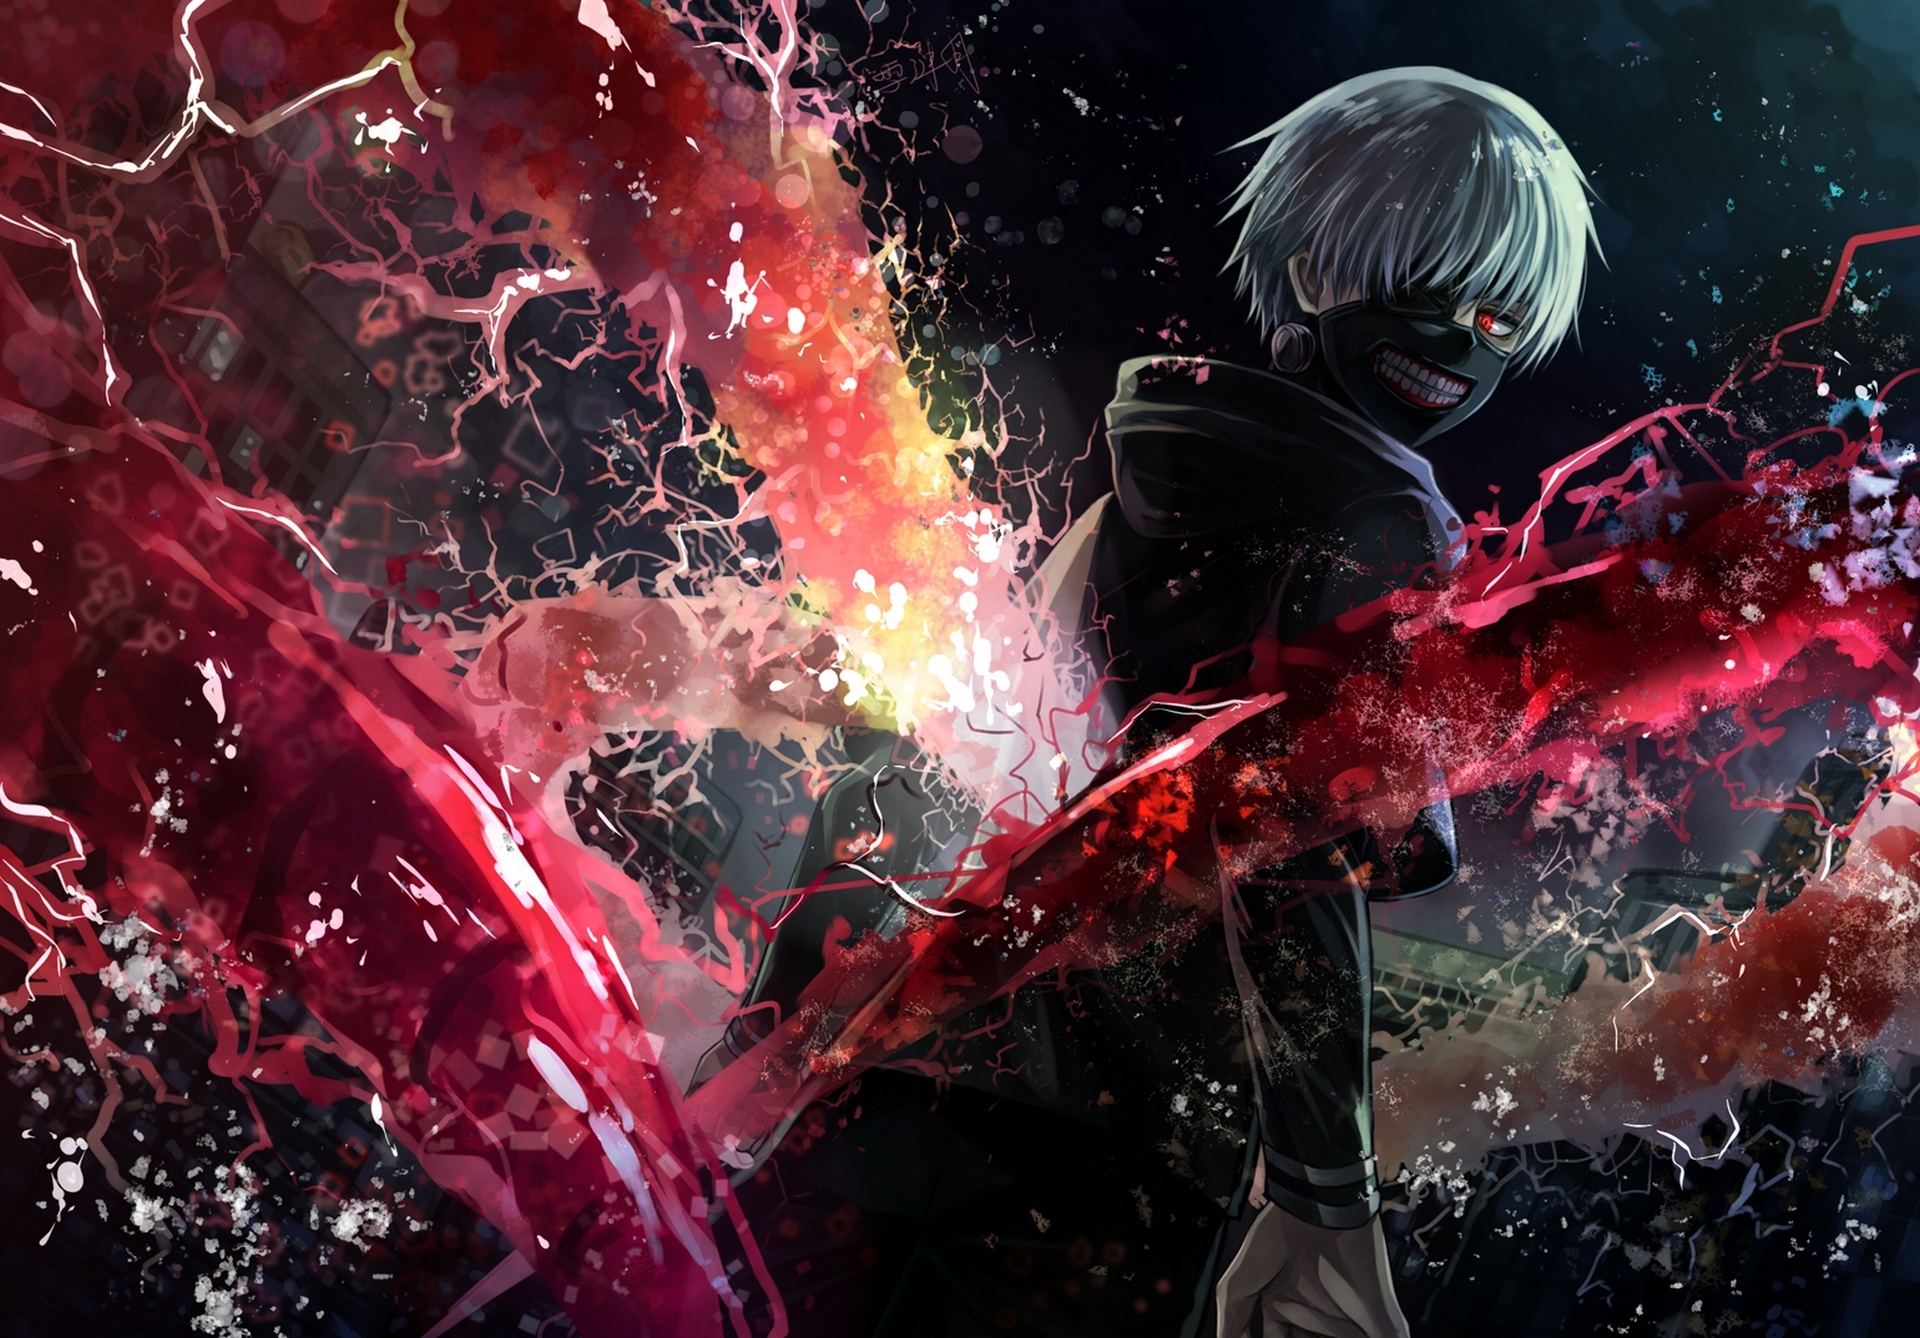 1000 Anime Tokyo Ghoul HD Wallpapers and Backgrounds